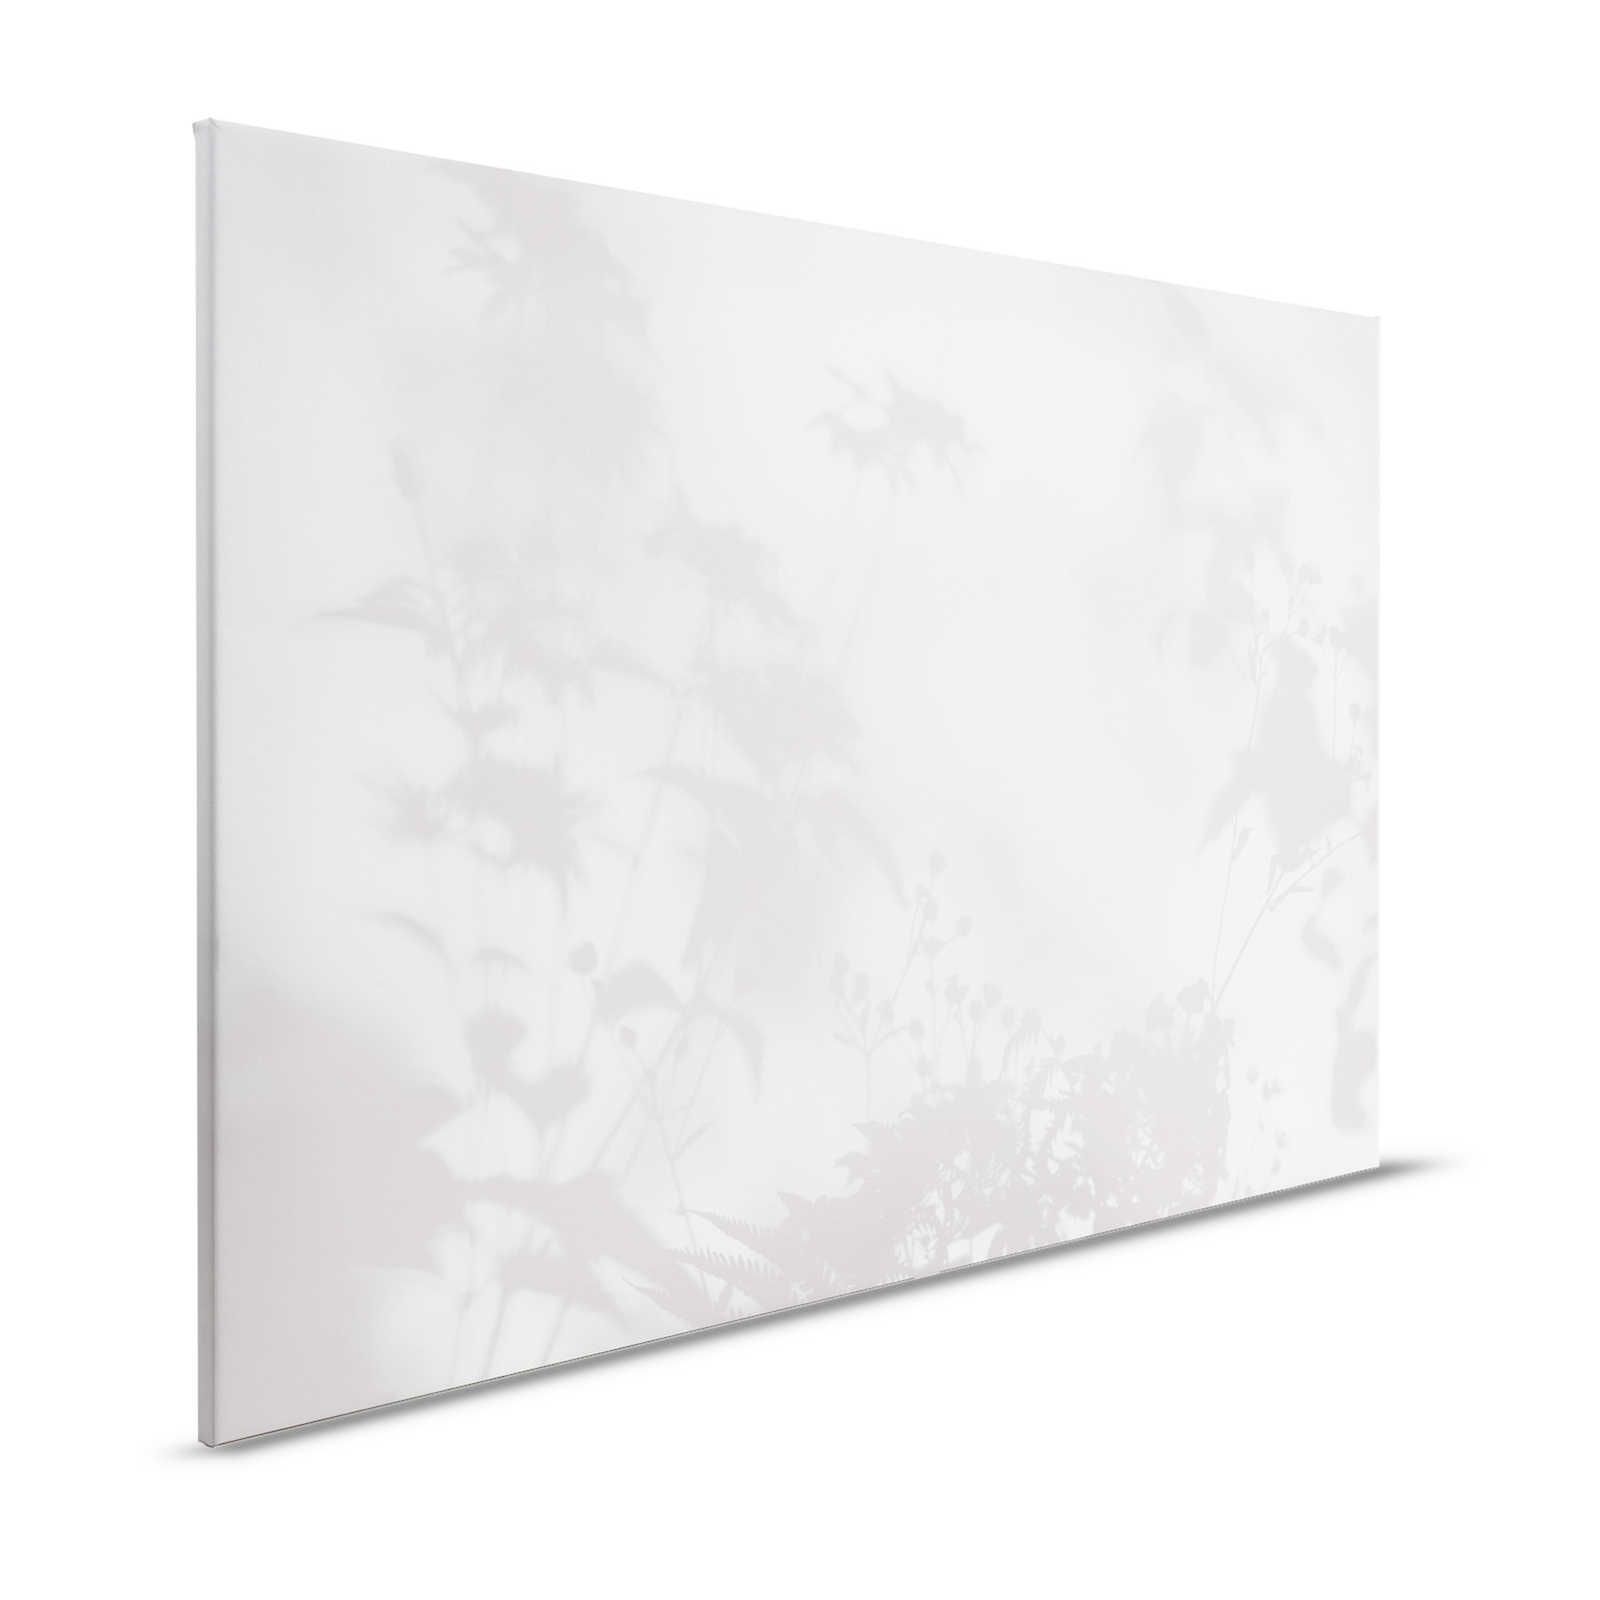 Shadow Room 2 - Nature Canvas Painting Grey & White, Faded Design - 1.20 m x 0.80 m
